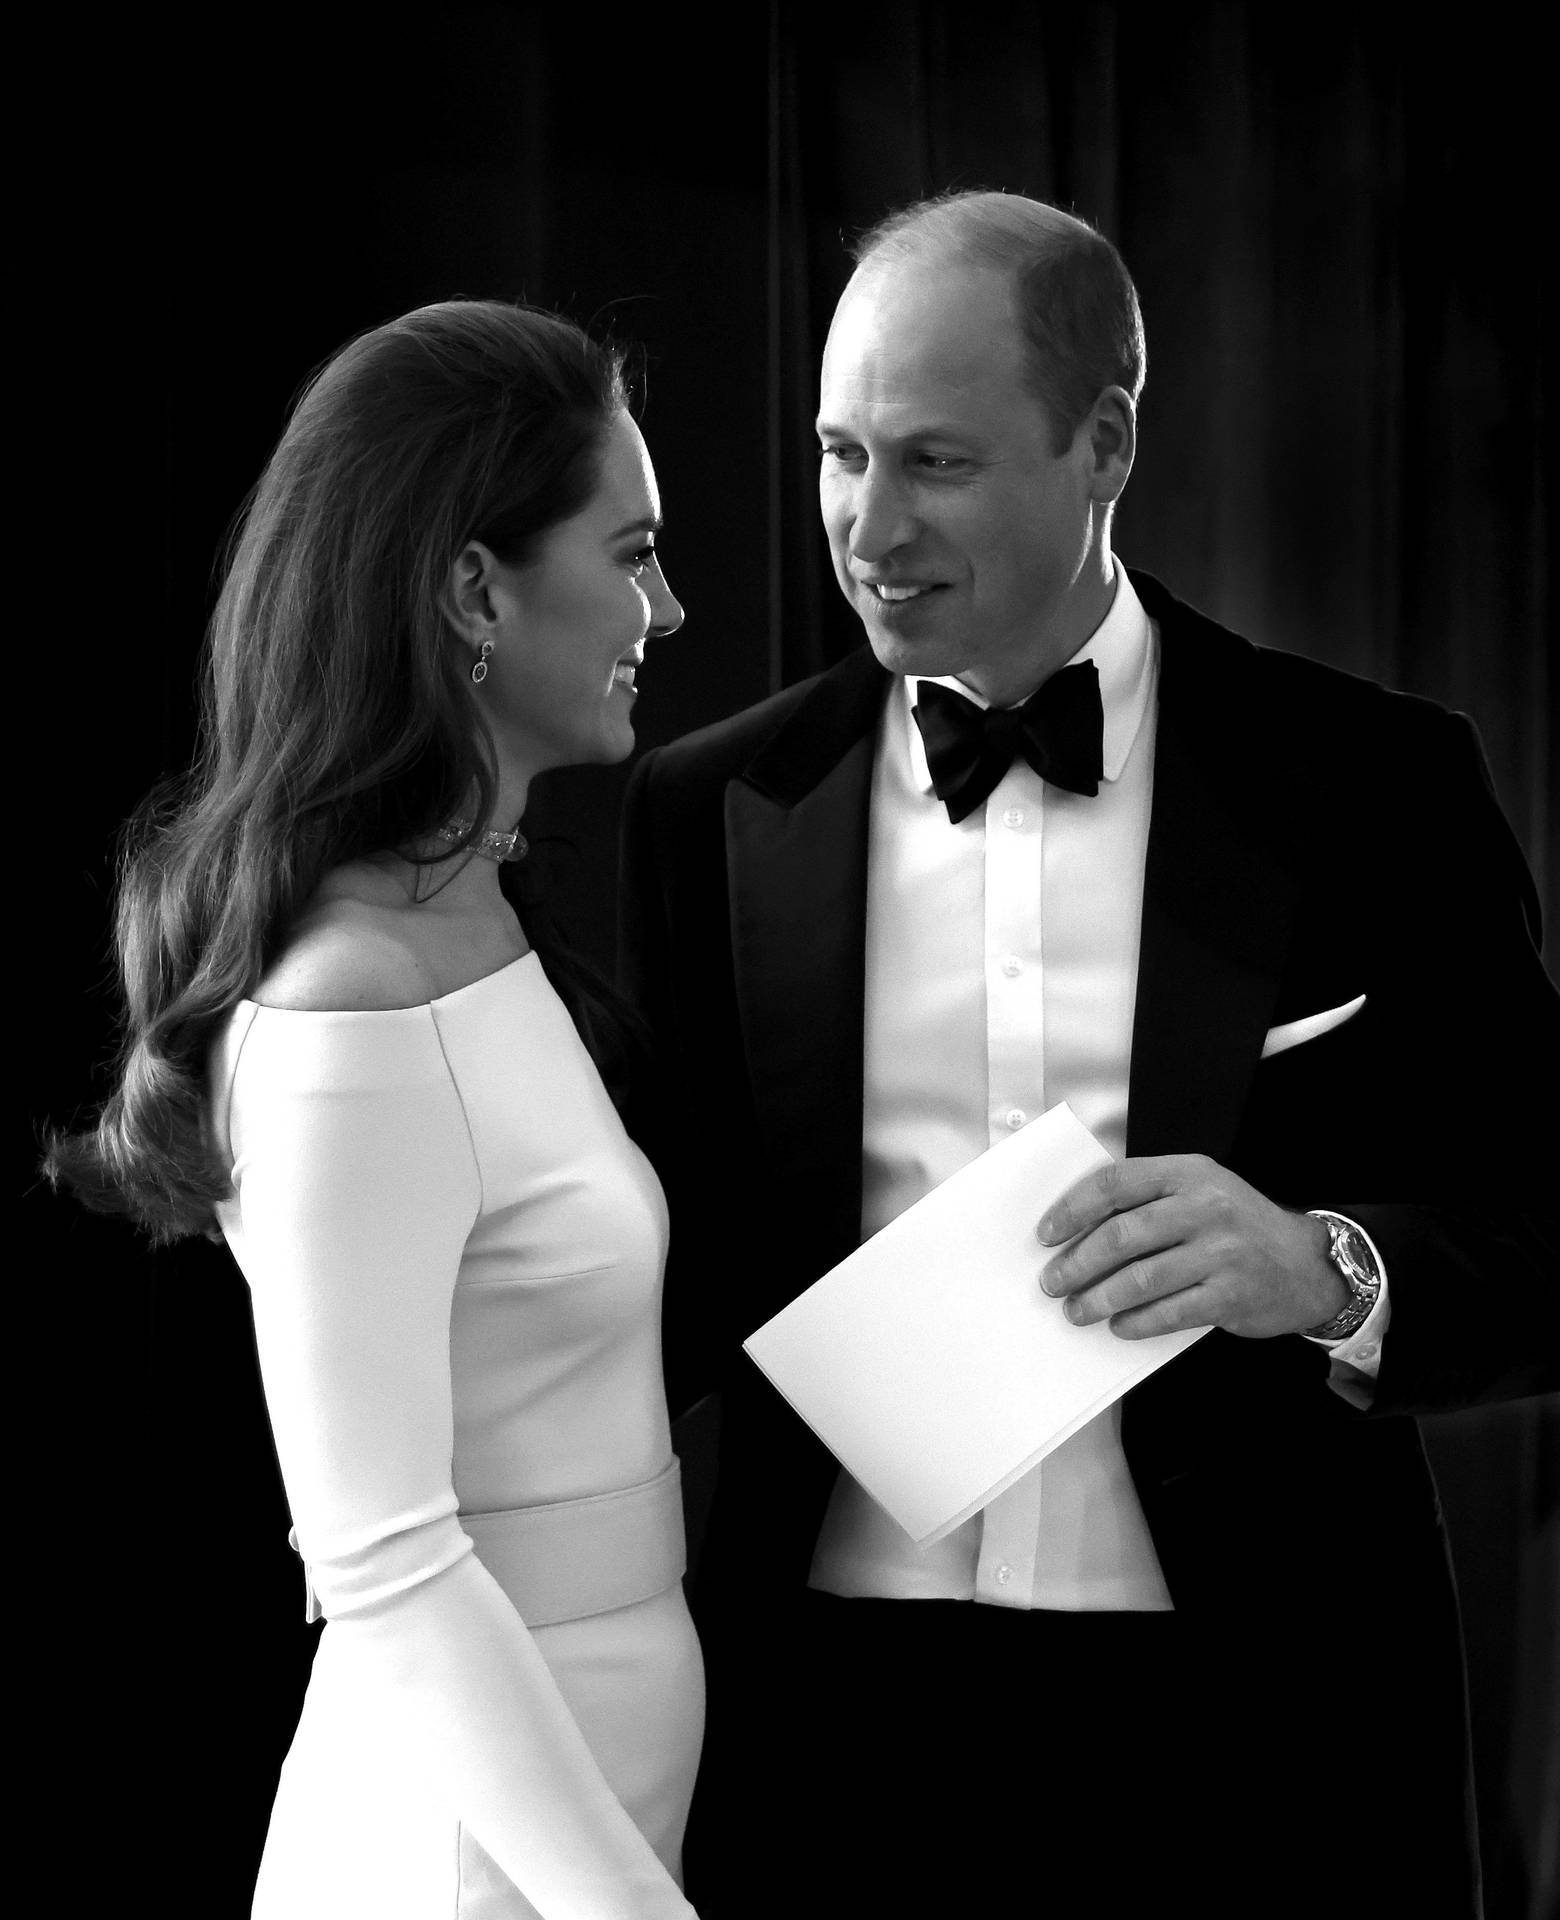 Monochrome Prince William And Kate Middleton Wallpaper